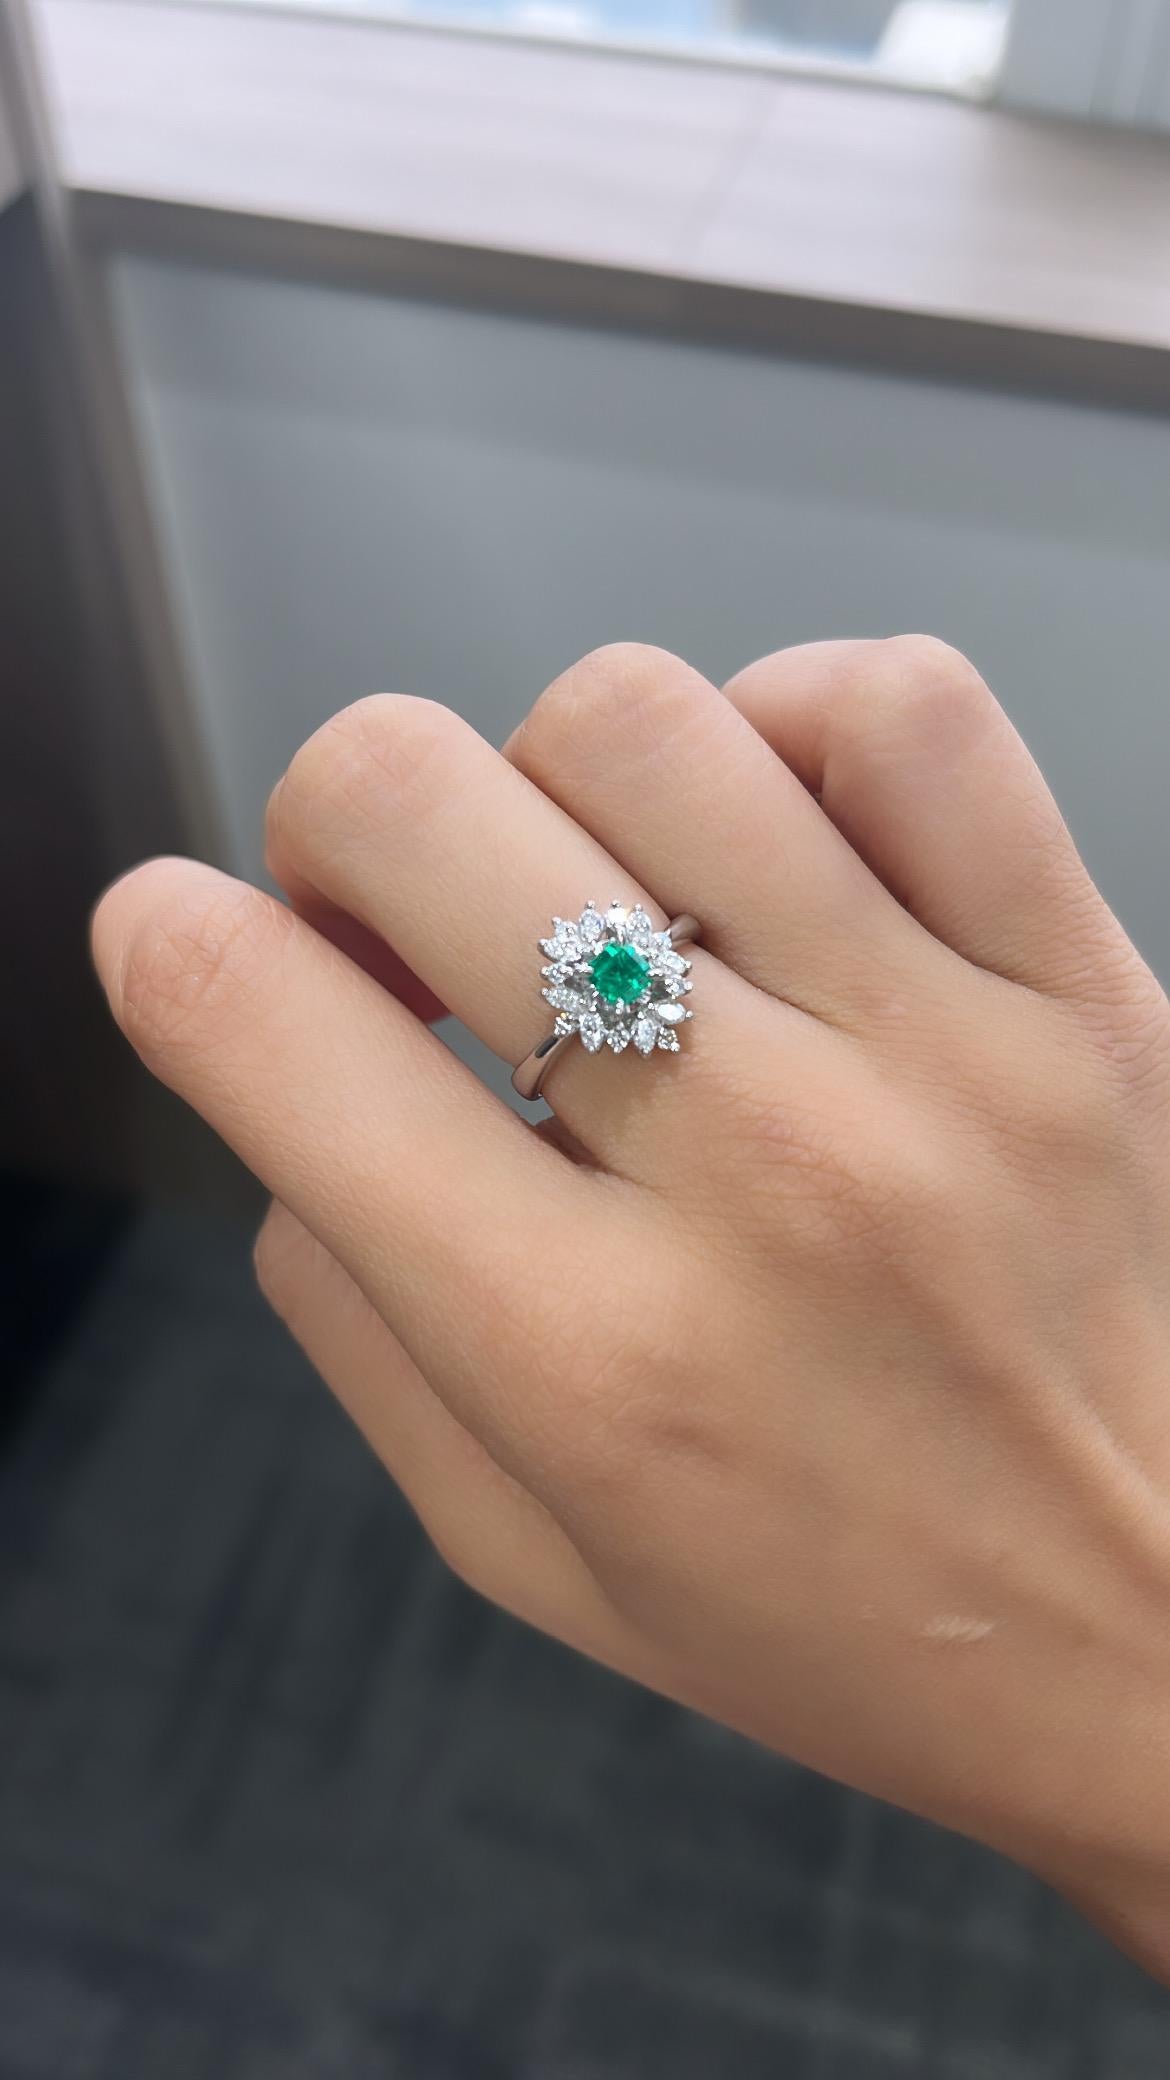 A very gorgeous and one of a kind, Emerald Engagement Ring set in Platinum 900 & Diamonds. The weight of the Emerald is 0.39 carats. The Emerald is of Columbian origin, and is completely natural, without any treatments. The weight of the Diamonds